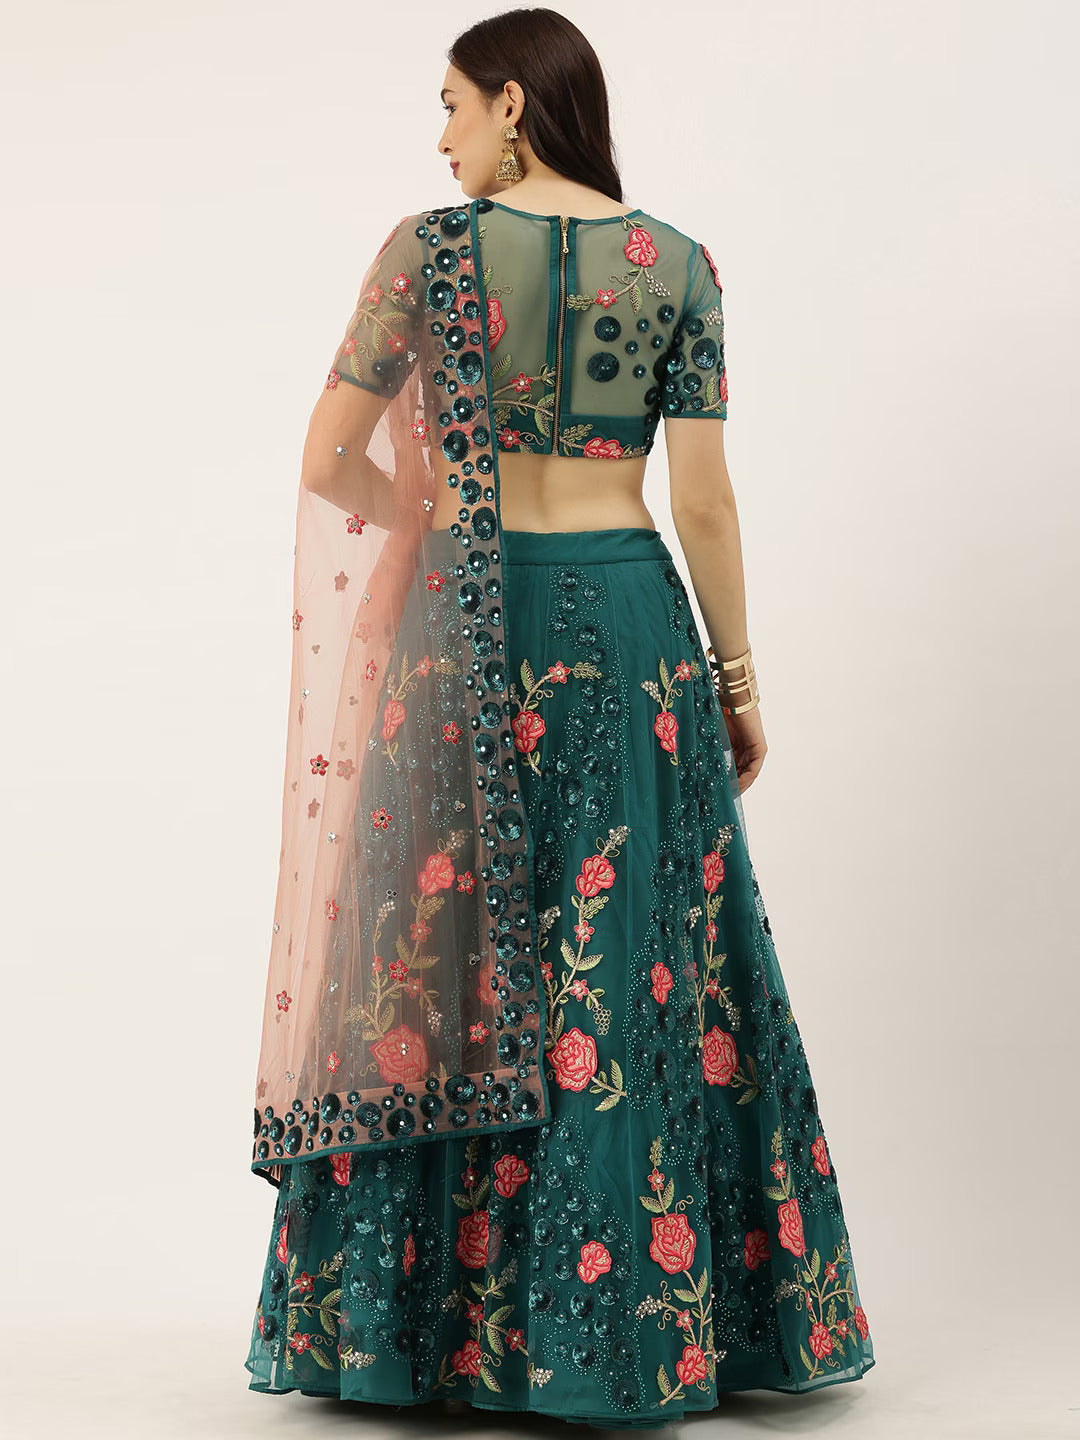 Teal & Pink Embroidered Semi-Stitched Lehenga & Unstitched Blouse with Dupatta